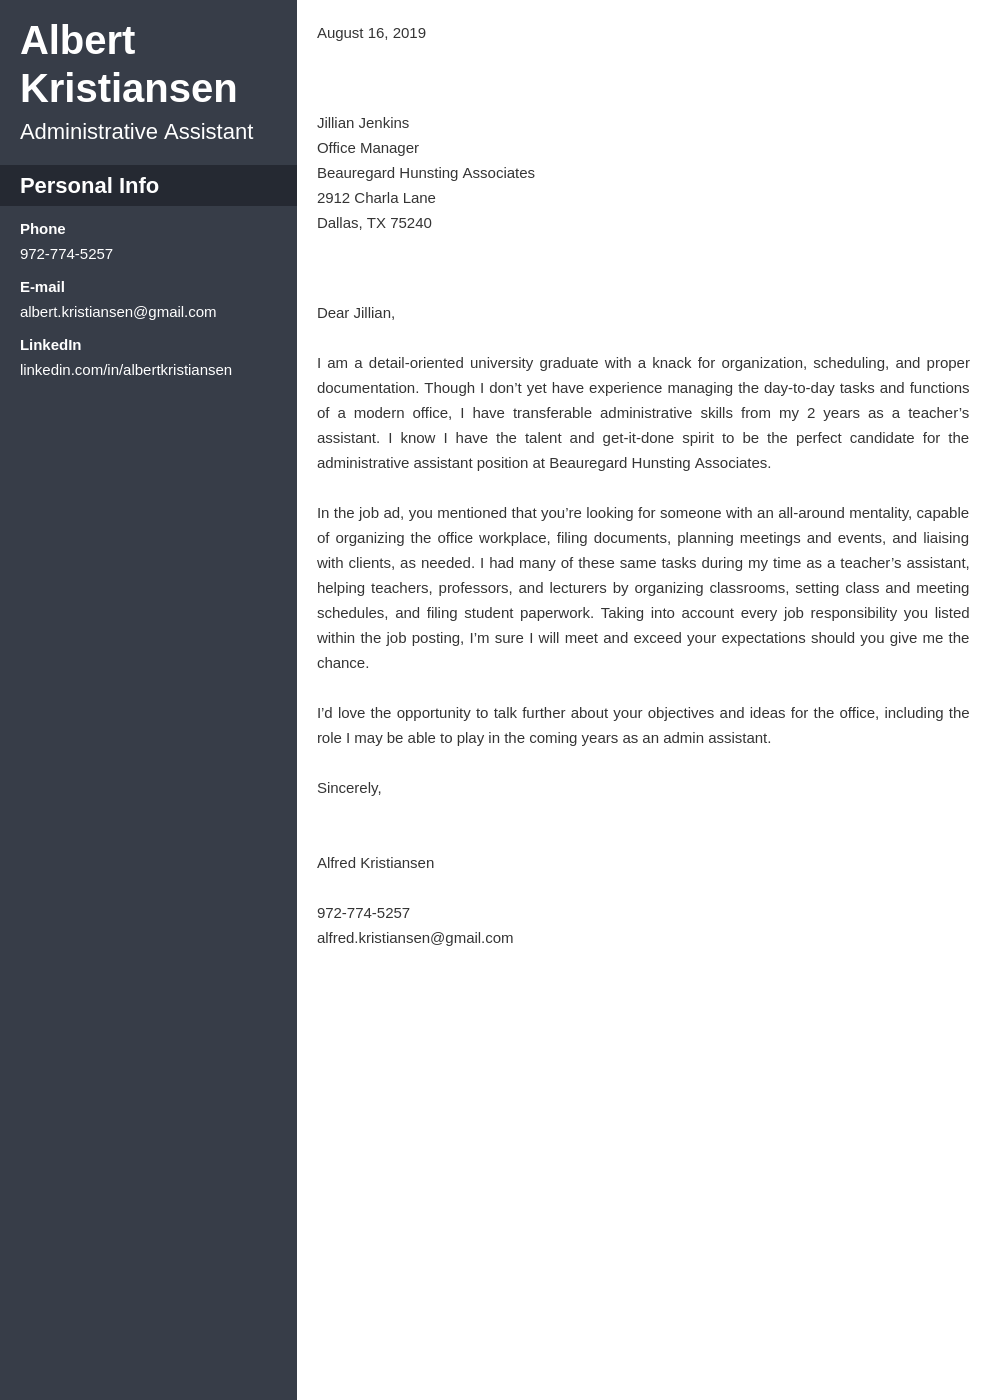 Administrative Assistant Cover Letter: Sample & Ready Templates